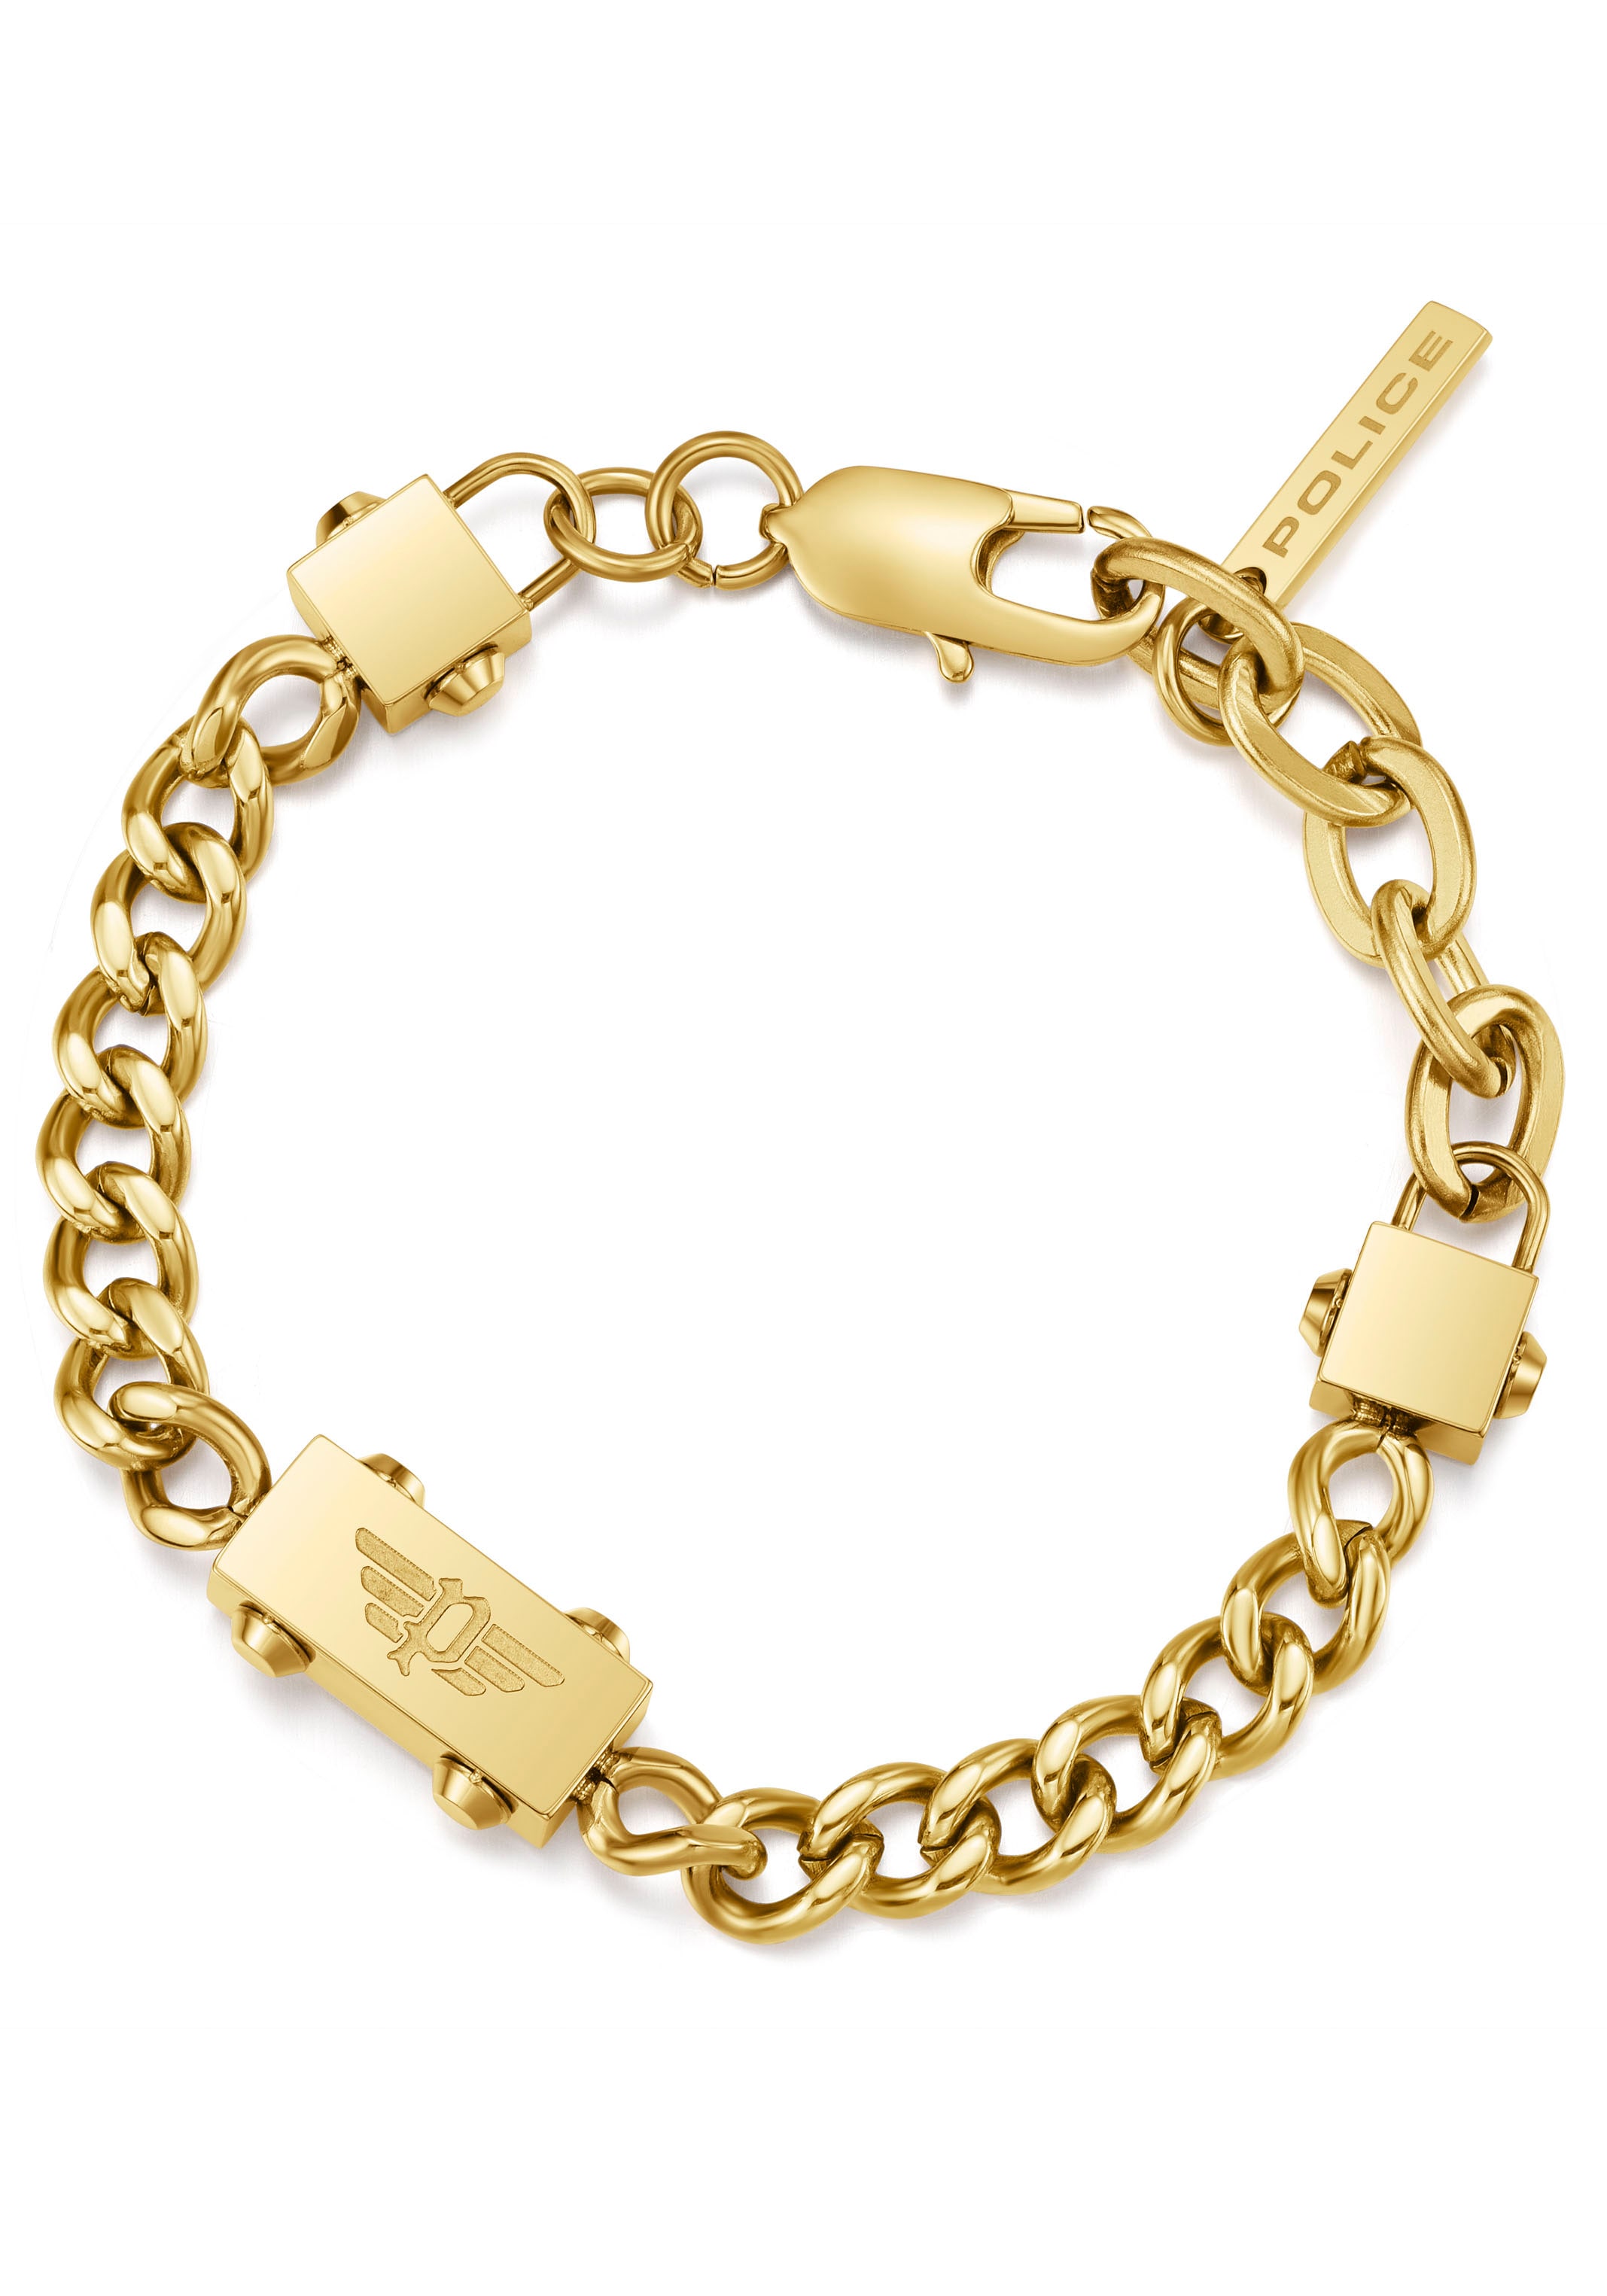 PEAGB0002106« »CHAINED, kaufen PEAGB0002102, | BAUR Armband online Police